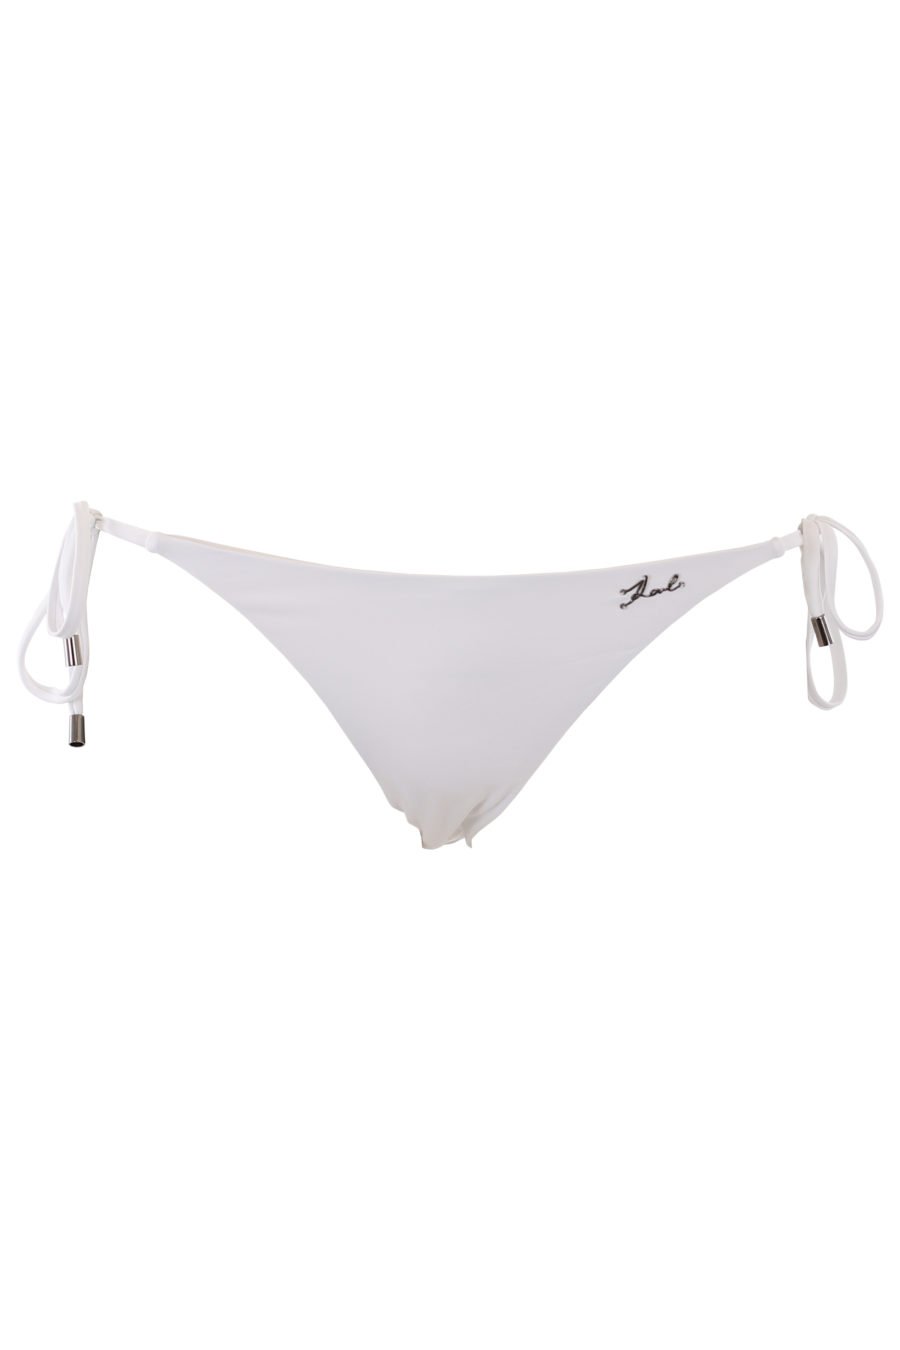 Bikini bottoms in white with lacing and small metal lettering logo - IMG 1324